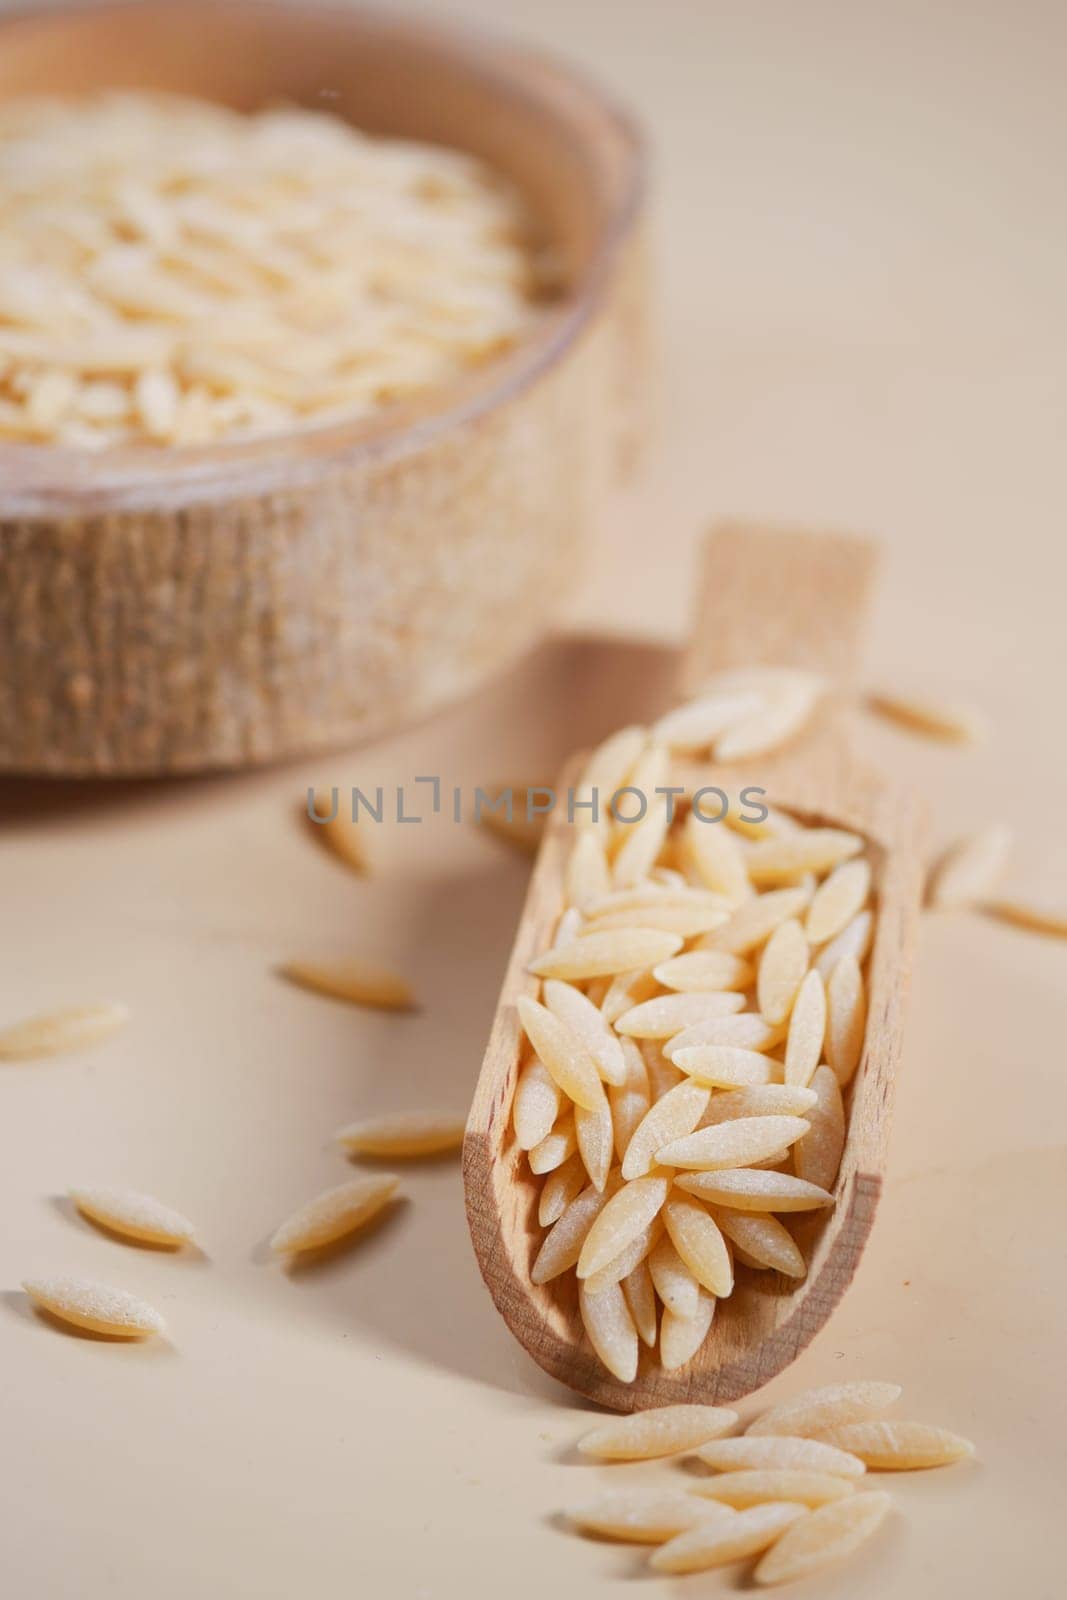 Wooden bowl with white long rice basmati